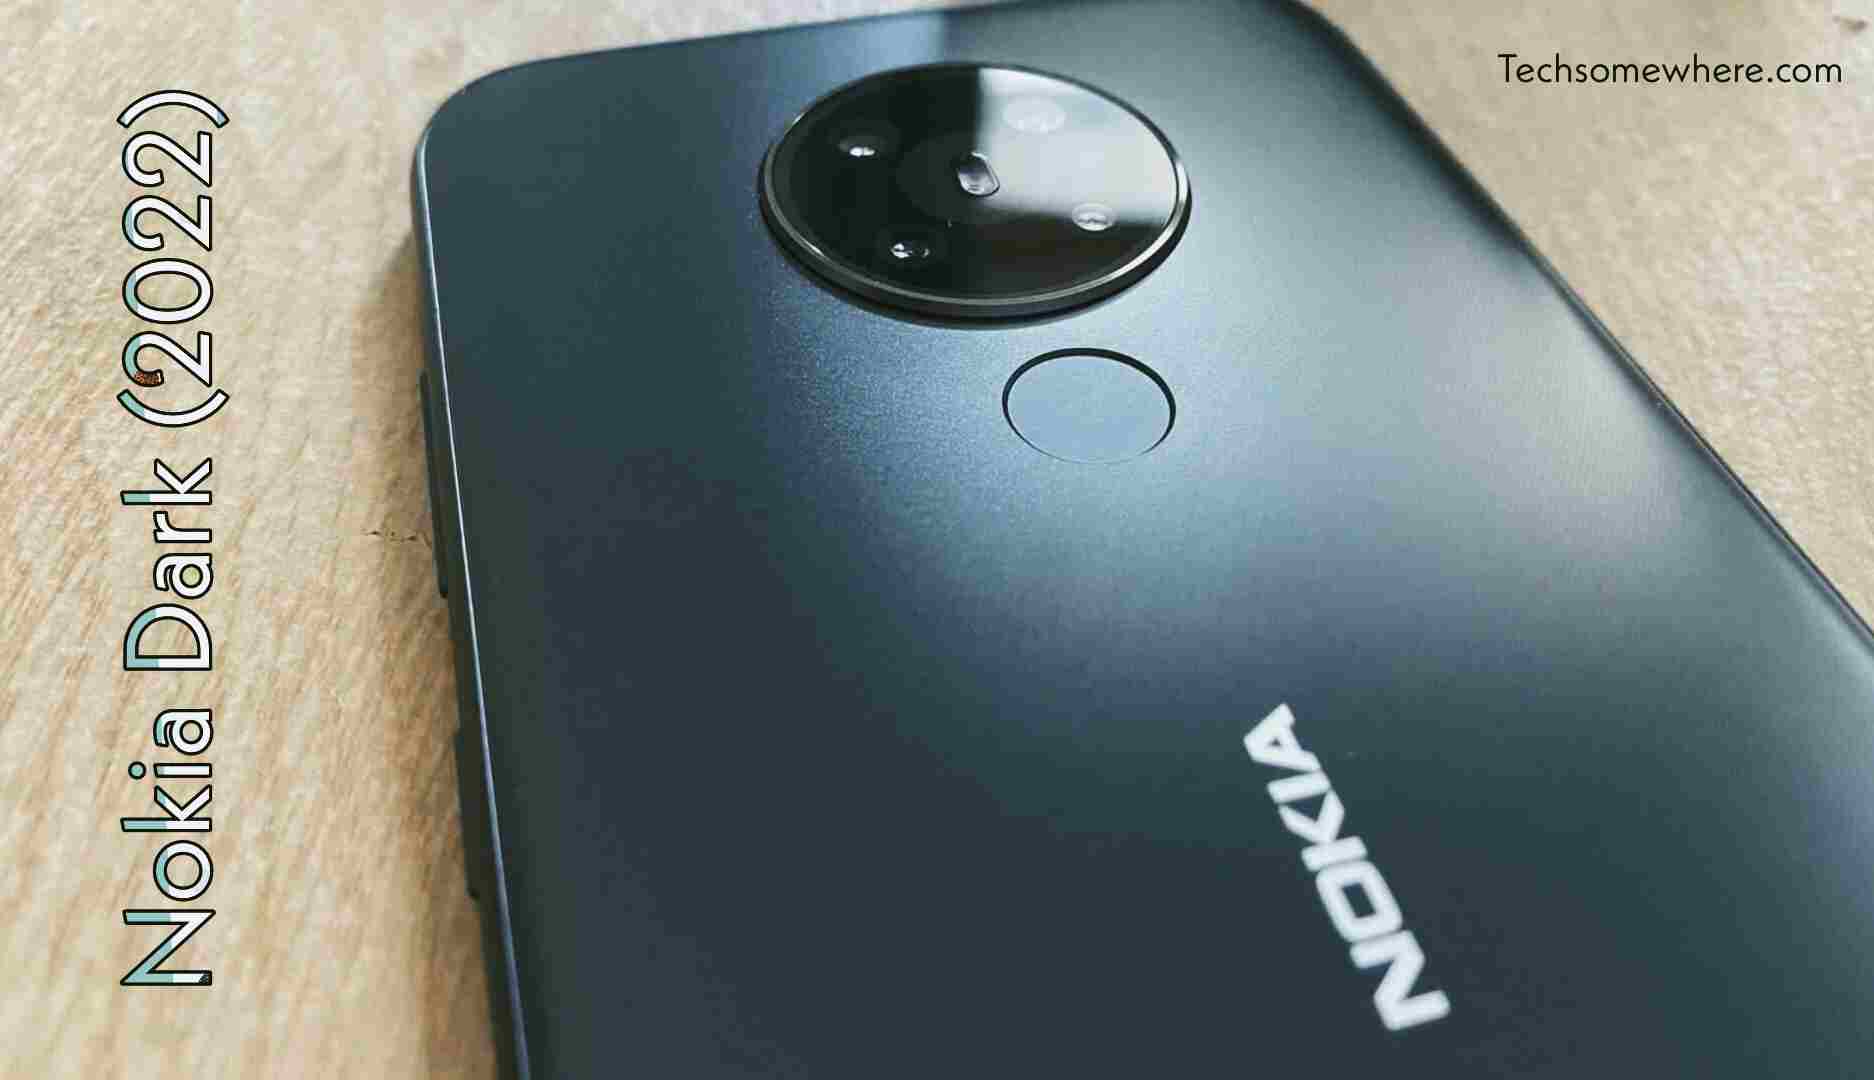 Nokia Dark 2022 Price, Full Specifications, Interesting Features & Release date - Techsomewhere